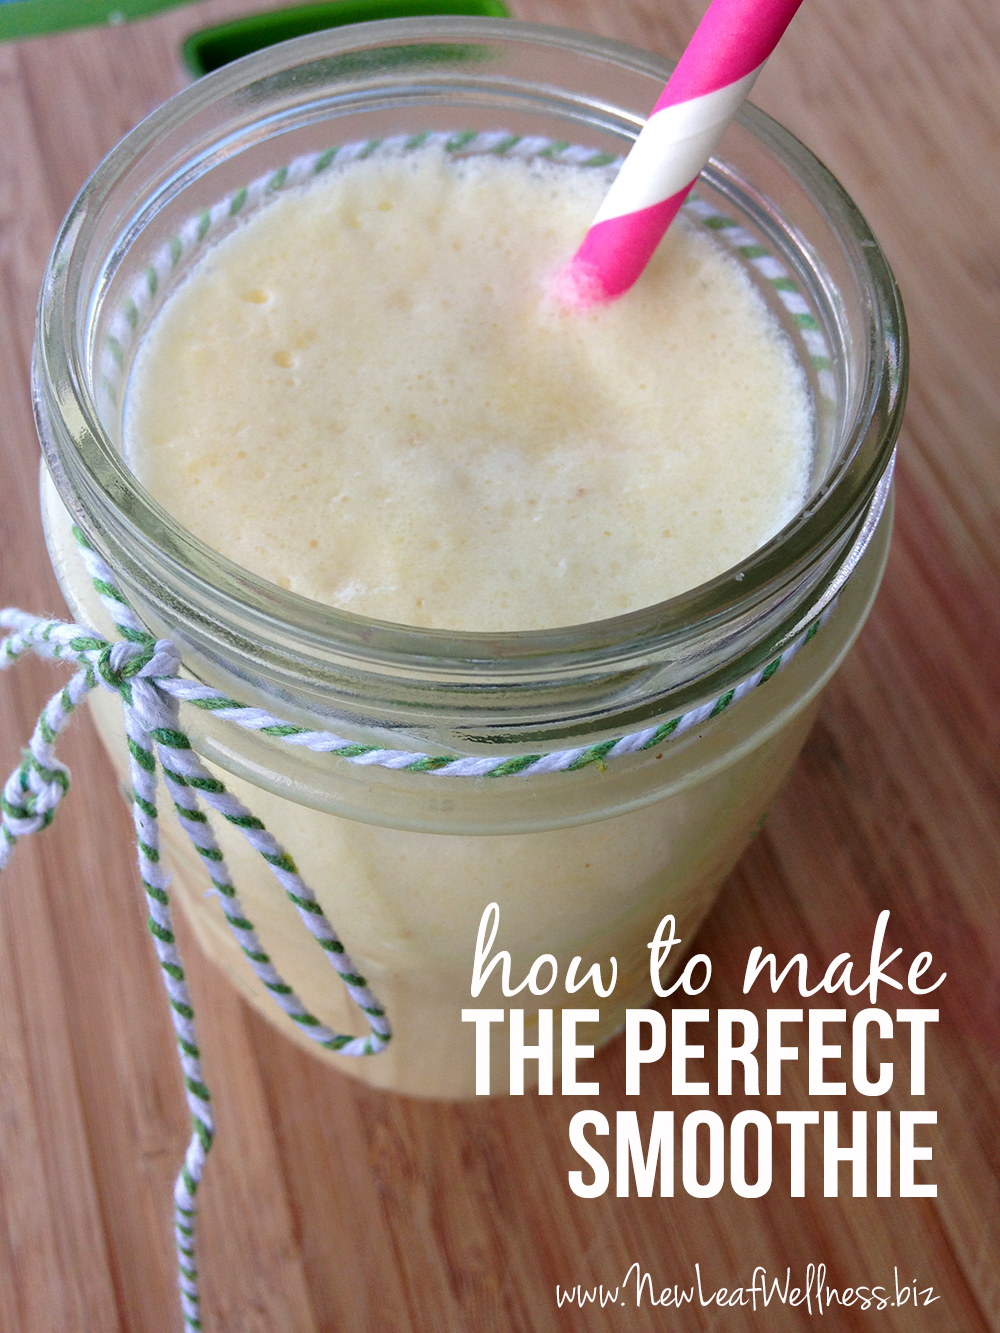 How to make the perfect smoothie